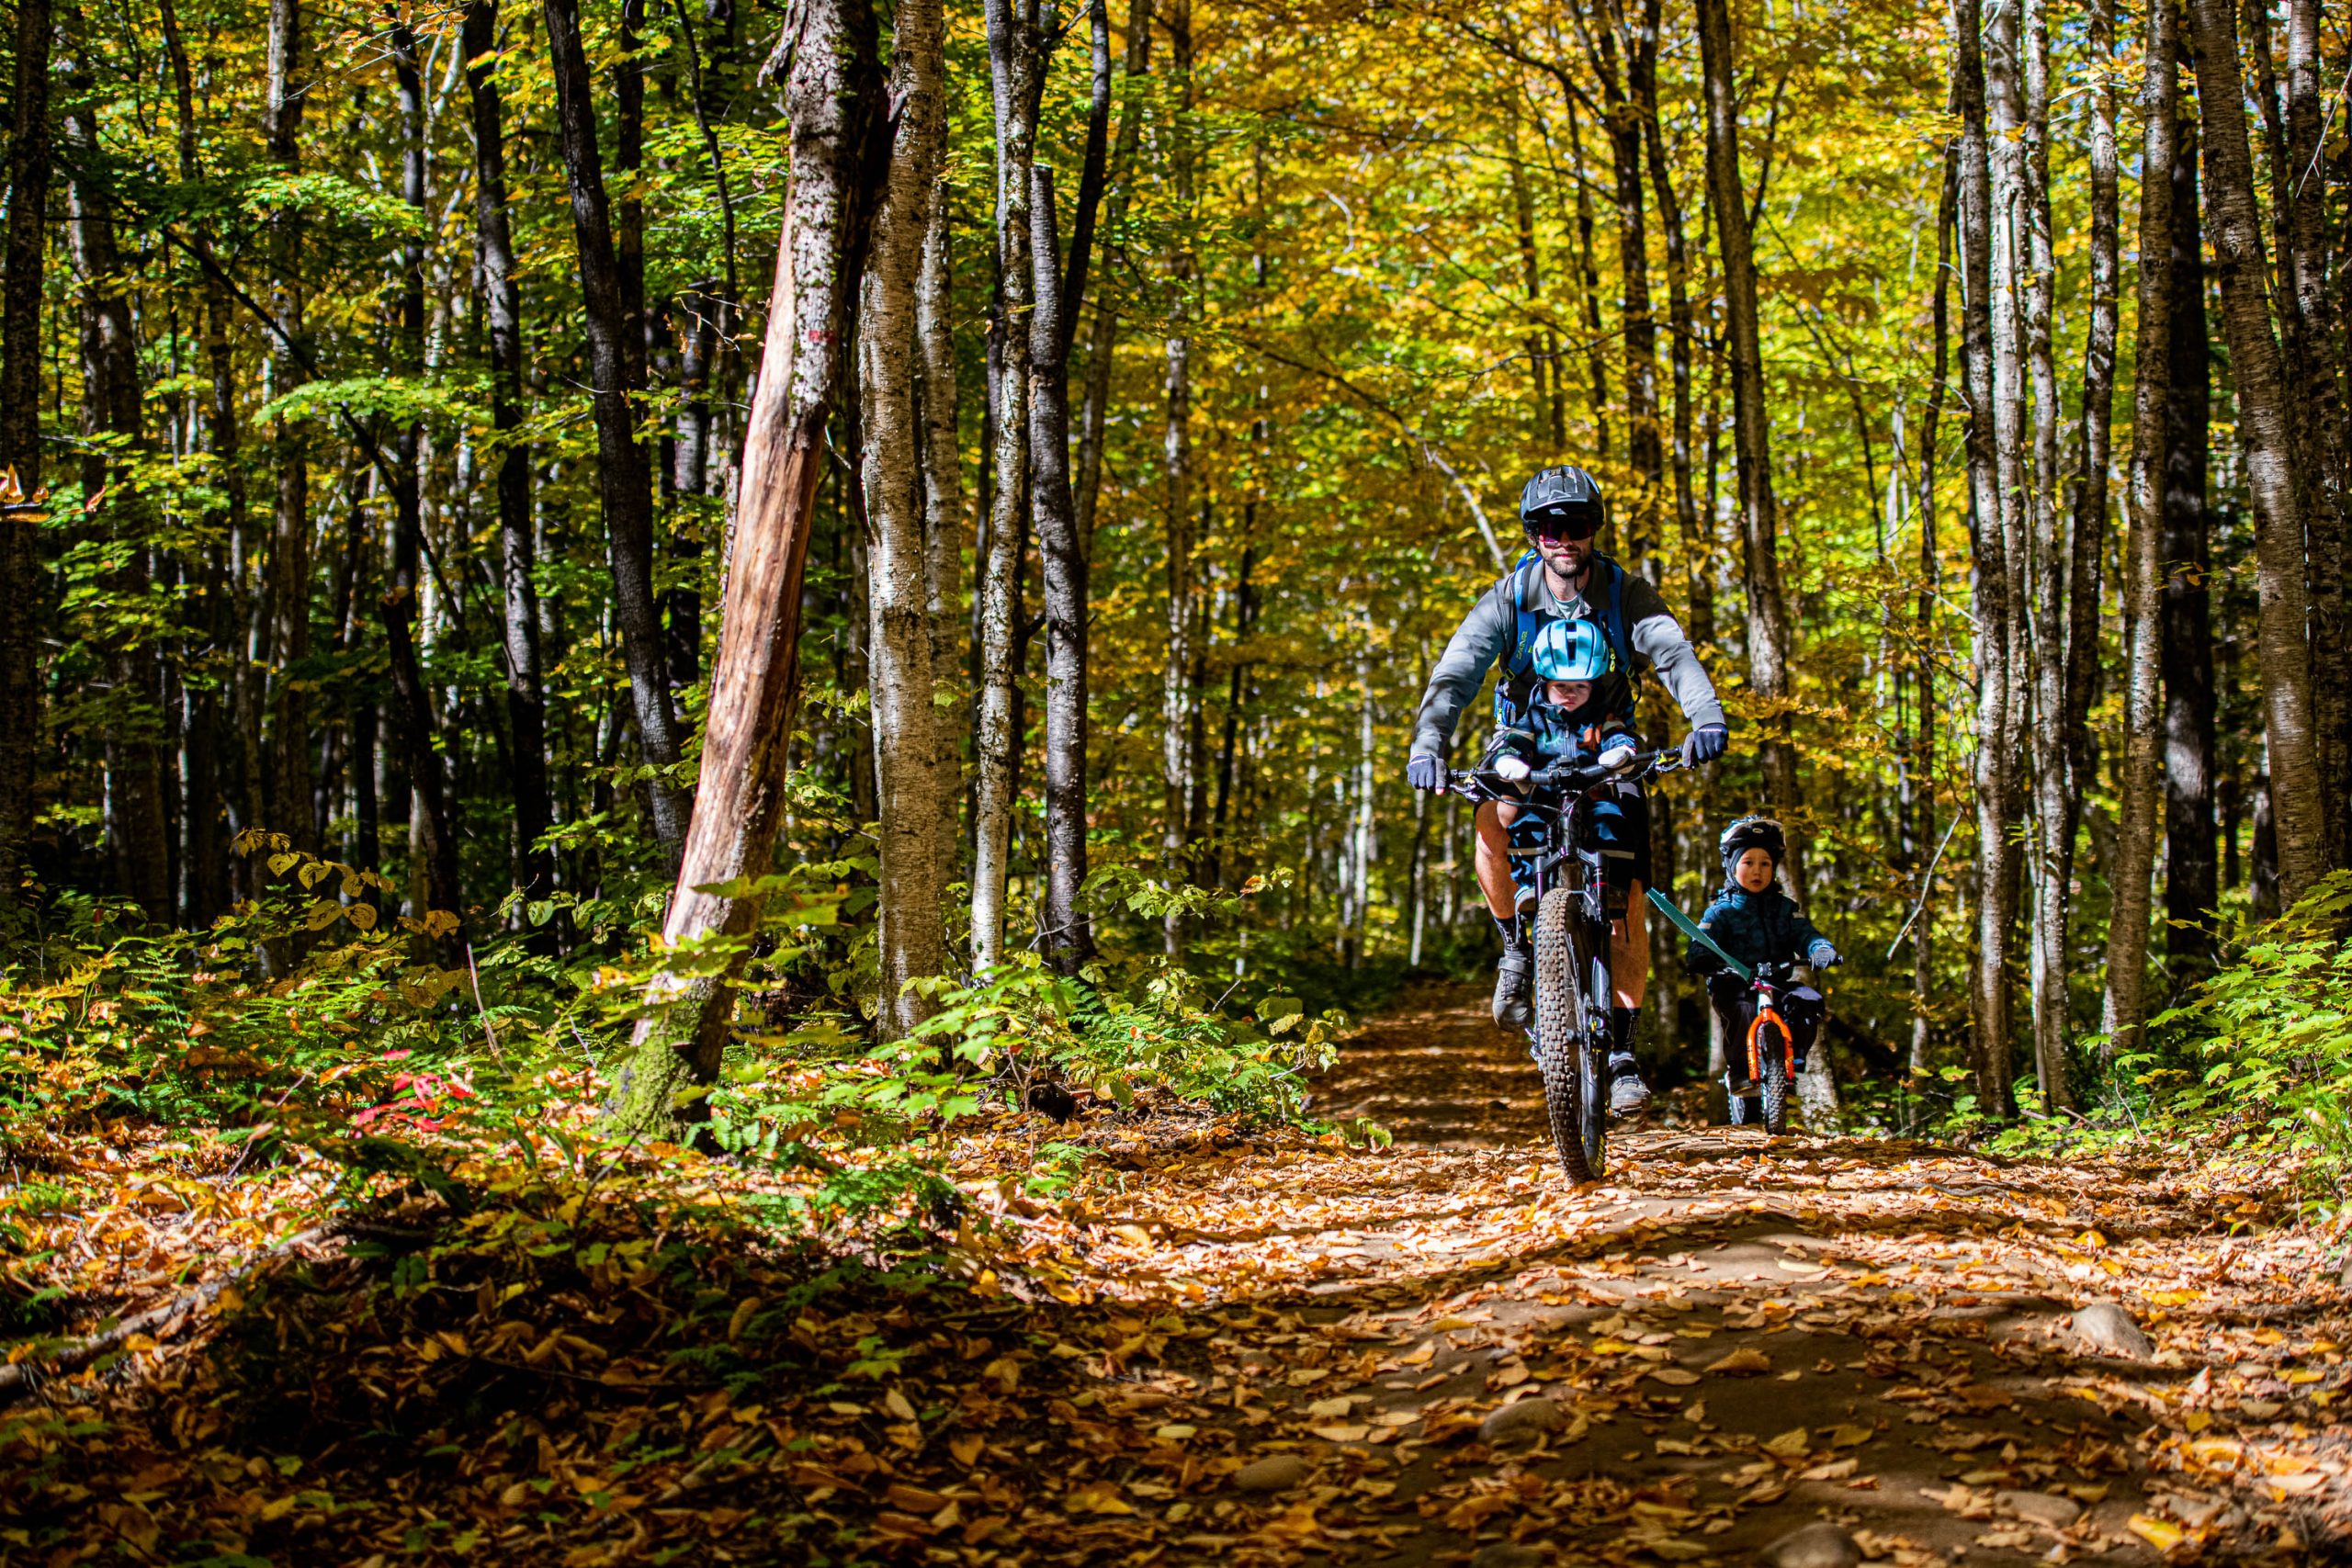 Two cyclists practicing an outdoor activity, mountain biking, on a trail surrounded by nature and forest in the Secteur des Sucrés.